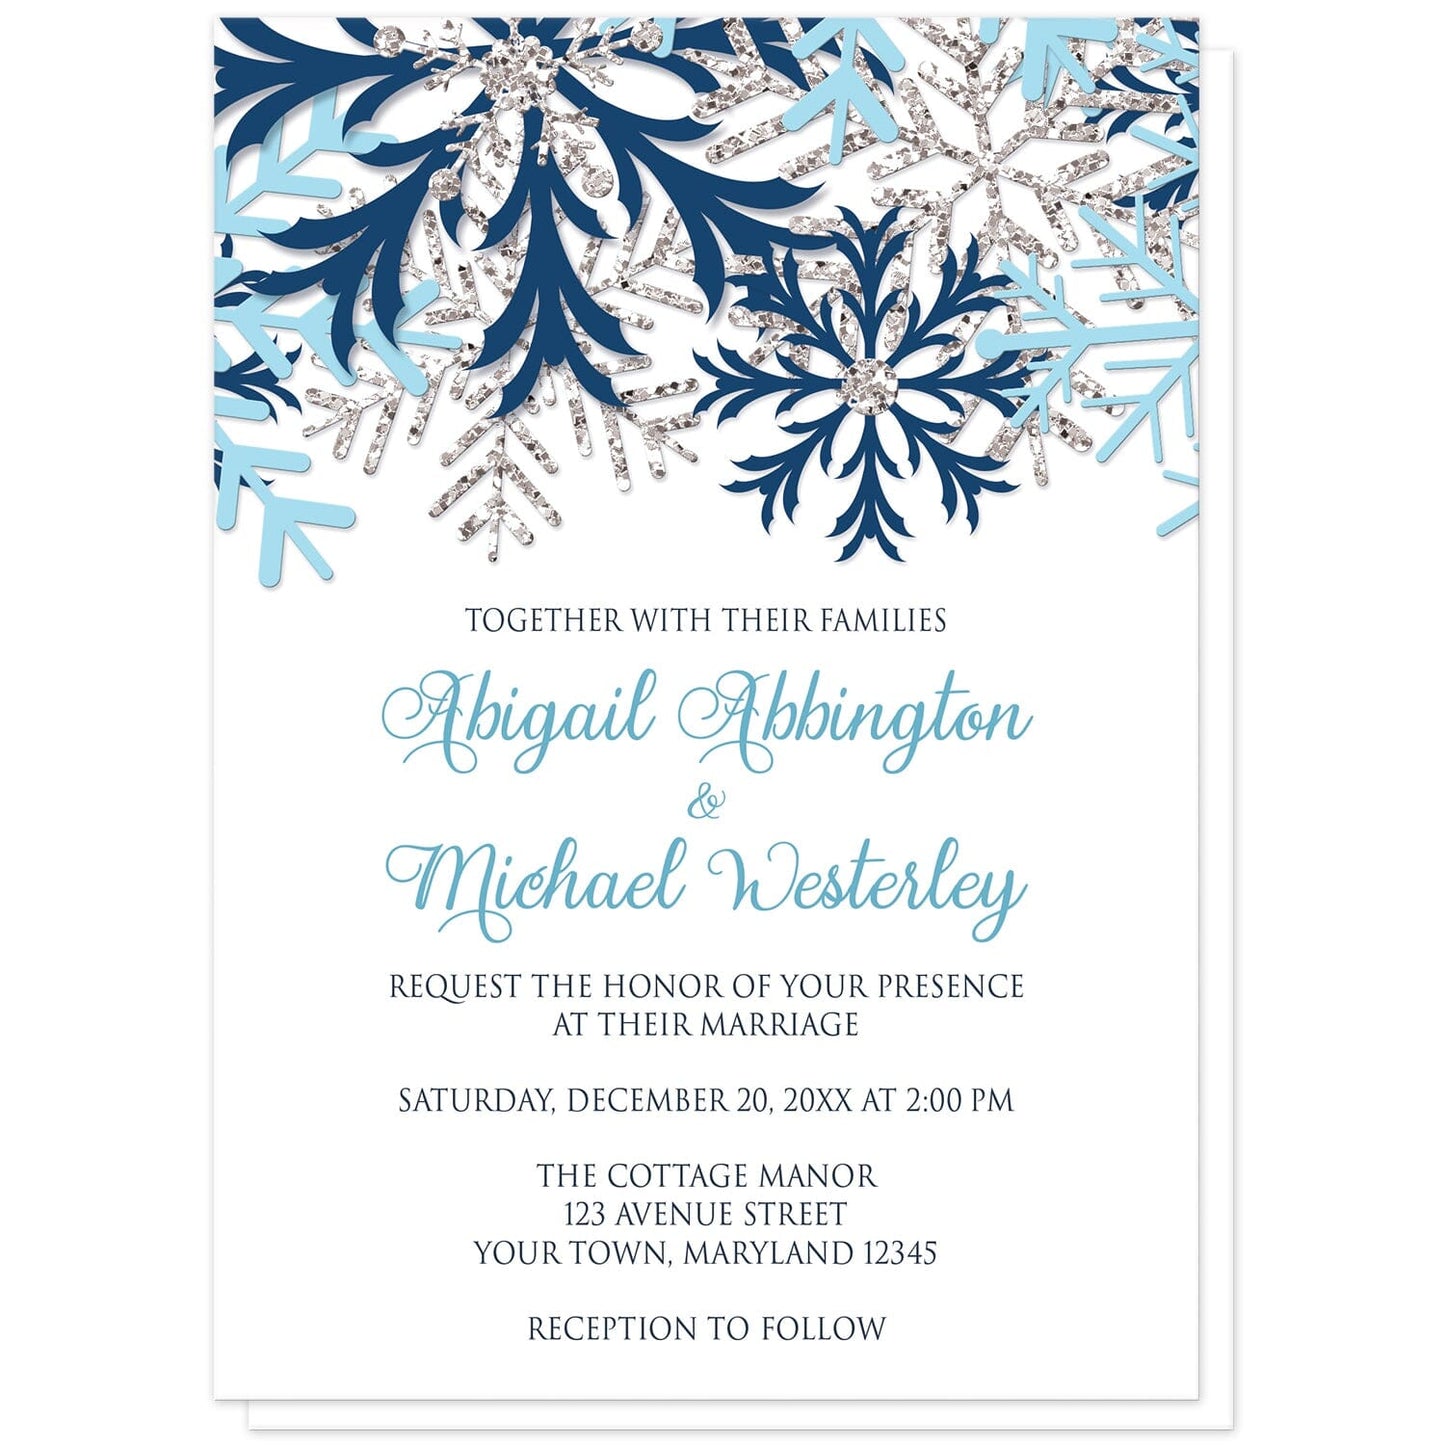 Winter Blue Silver Snowflake Wedding Invitations at Artistically Invited. Beautiful winter blue silver snowflake wedding invitations designed with navy blue, aqua blue, and silver-colored glitter-illustrated snowflakes along the top over a white background. Your personalized marriage celebration details are custom printed in blue and navy blue below the pretty snowflakes.